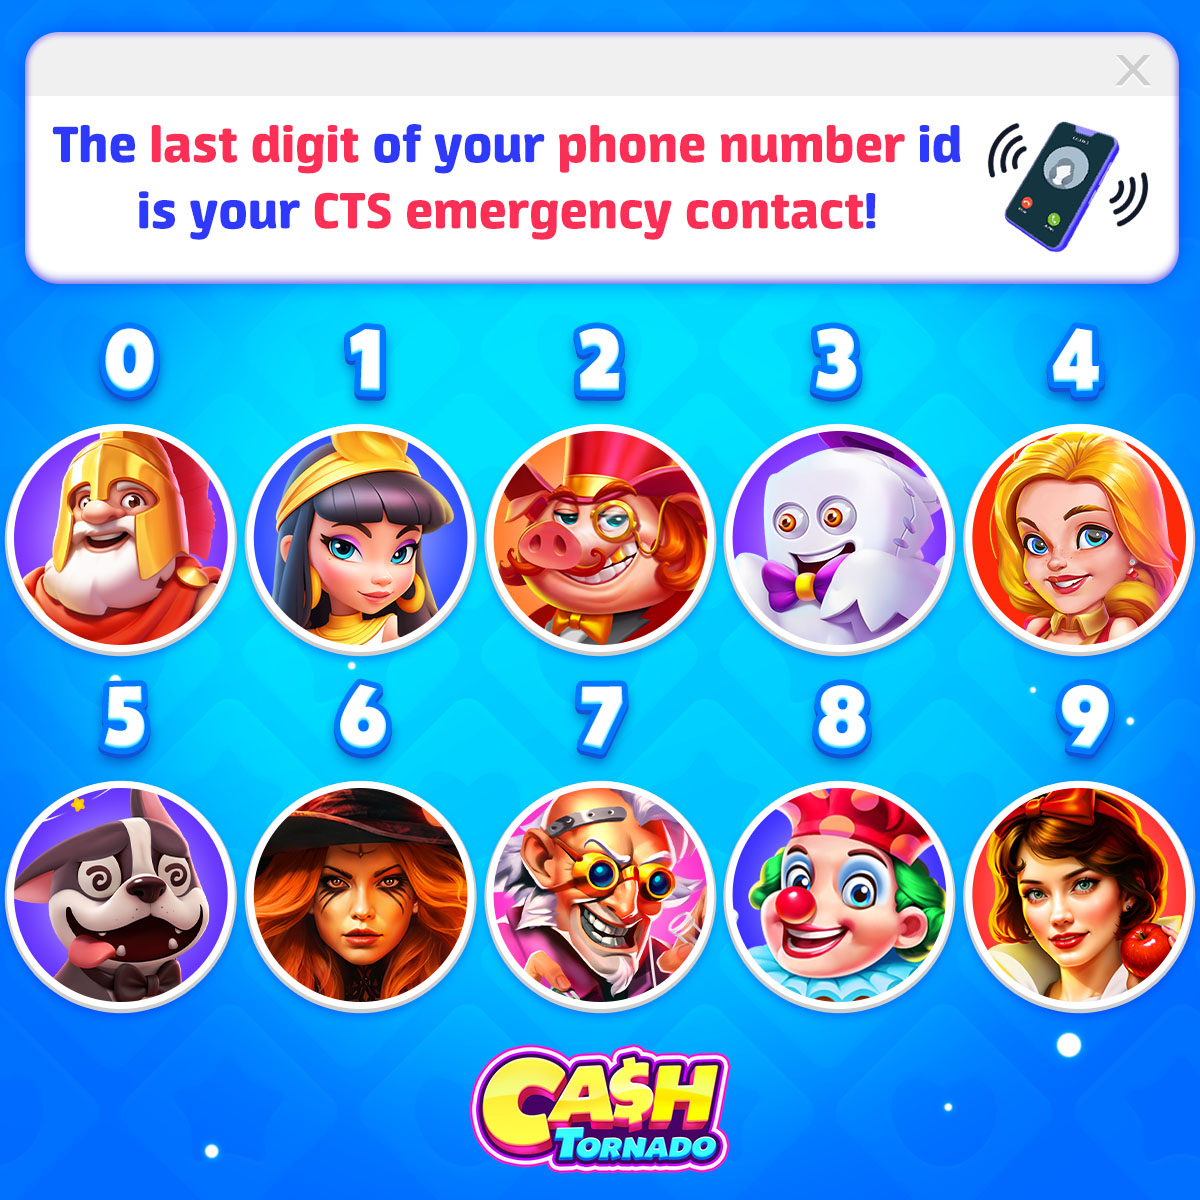 #FREECOIN:zeroo.games/yrxw4p3e
📱 Who's your emergency contact in CTS? 🤔
Tell us your answer! 💬